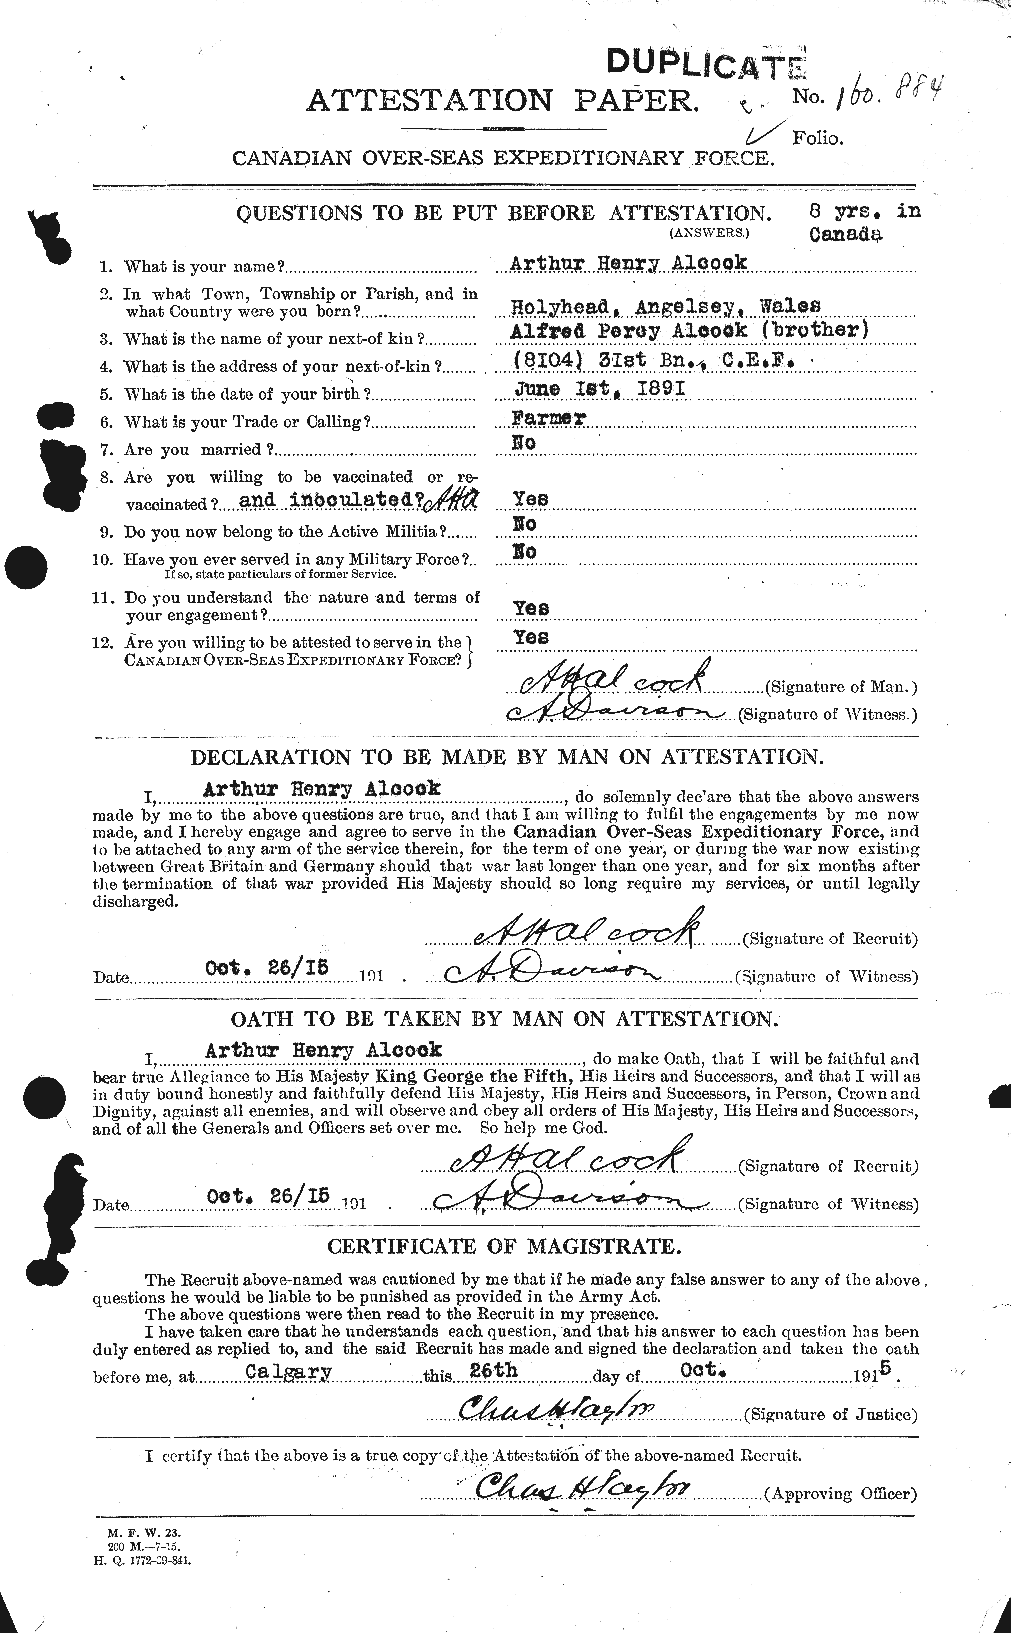 Personnel Records of the First World War - CEF 204732a